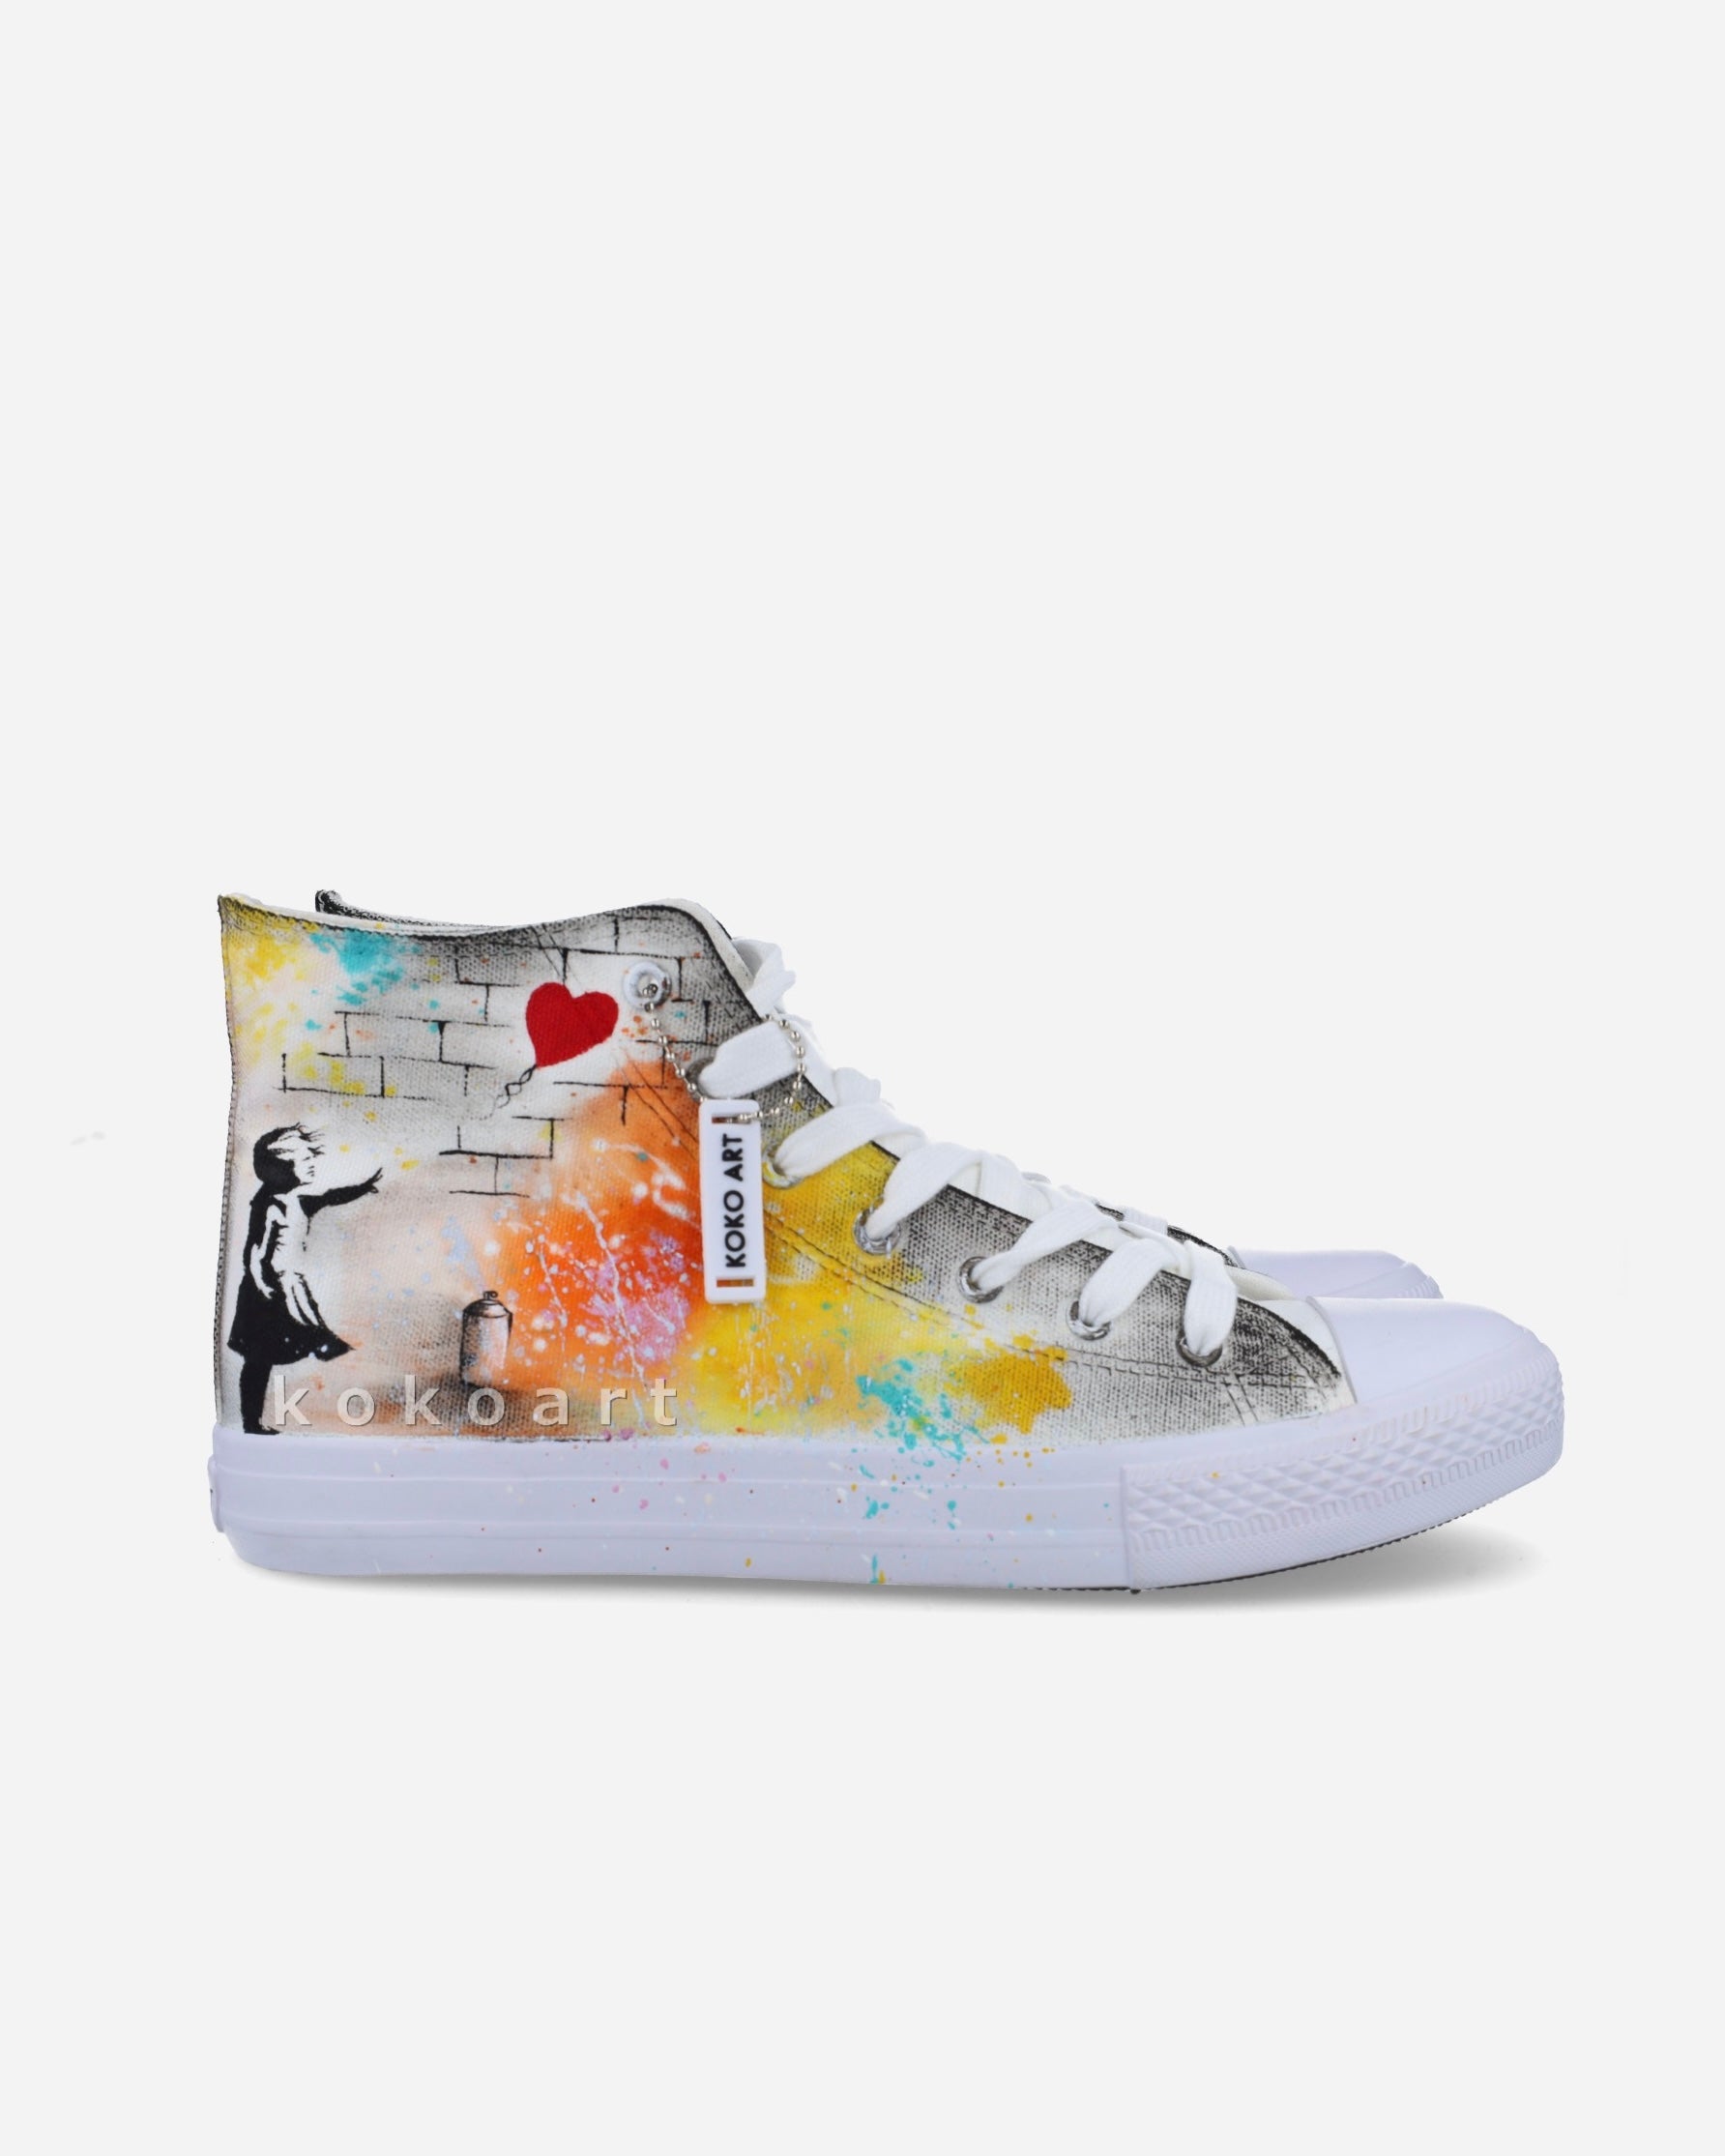 Banksy Girl with Balloon Graffiti Wall Hand Painted Shoes